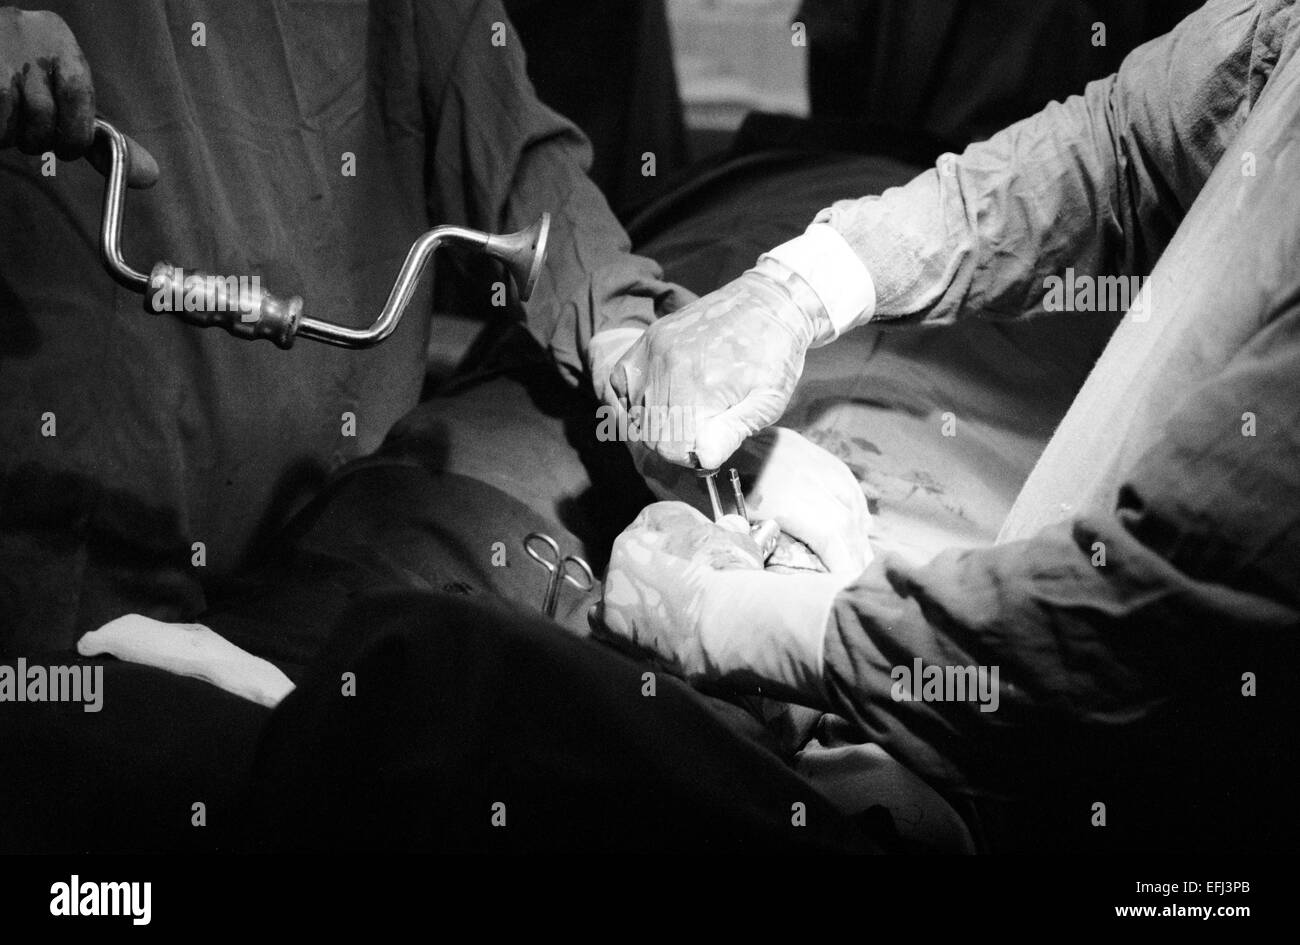 MSF surgeons perform a callus distraction on a wounded patient in Kismayo Somalia 1994 Stock Photo